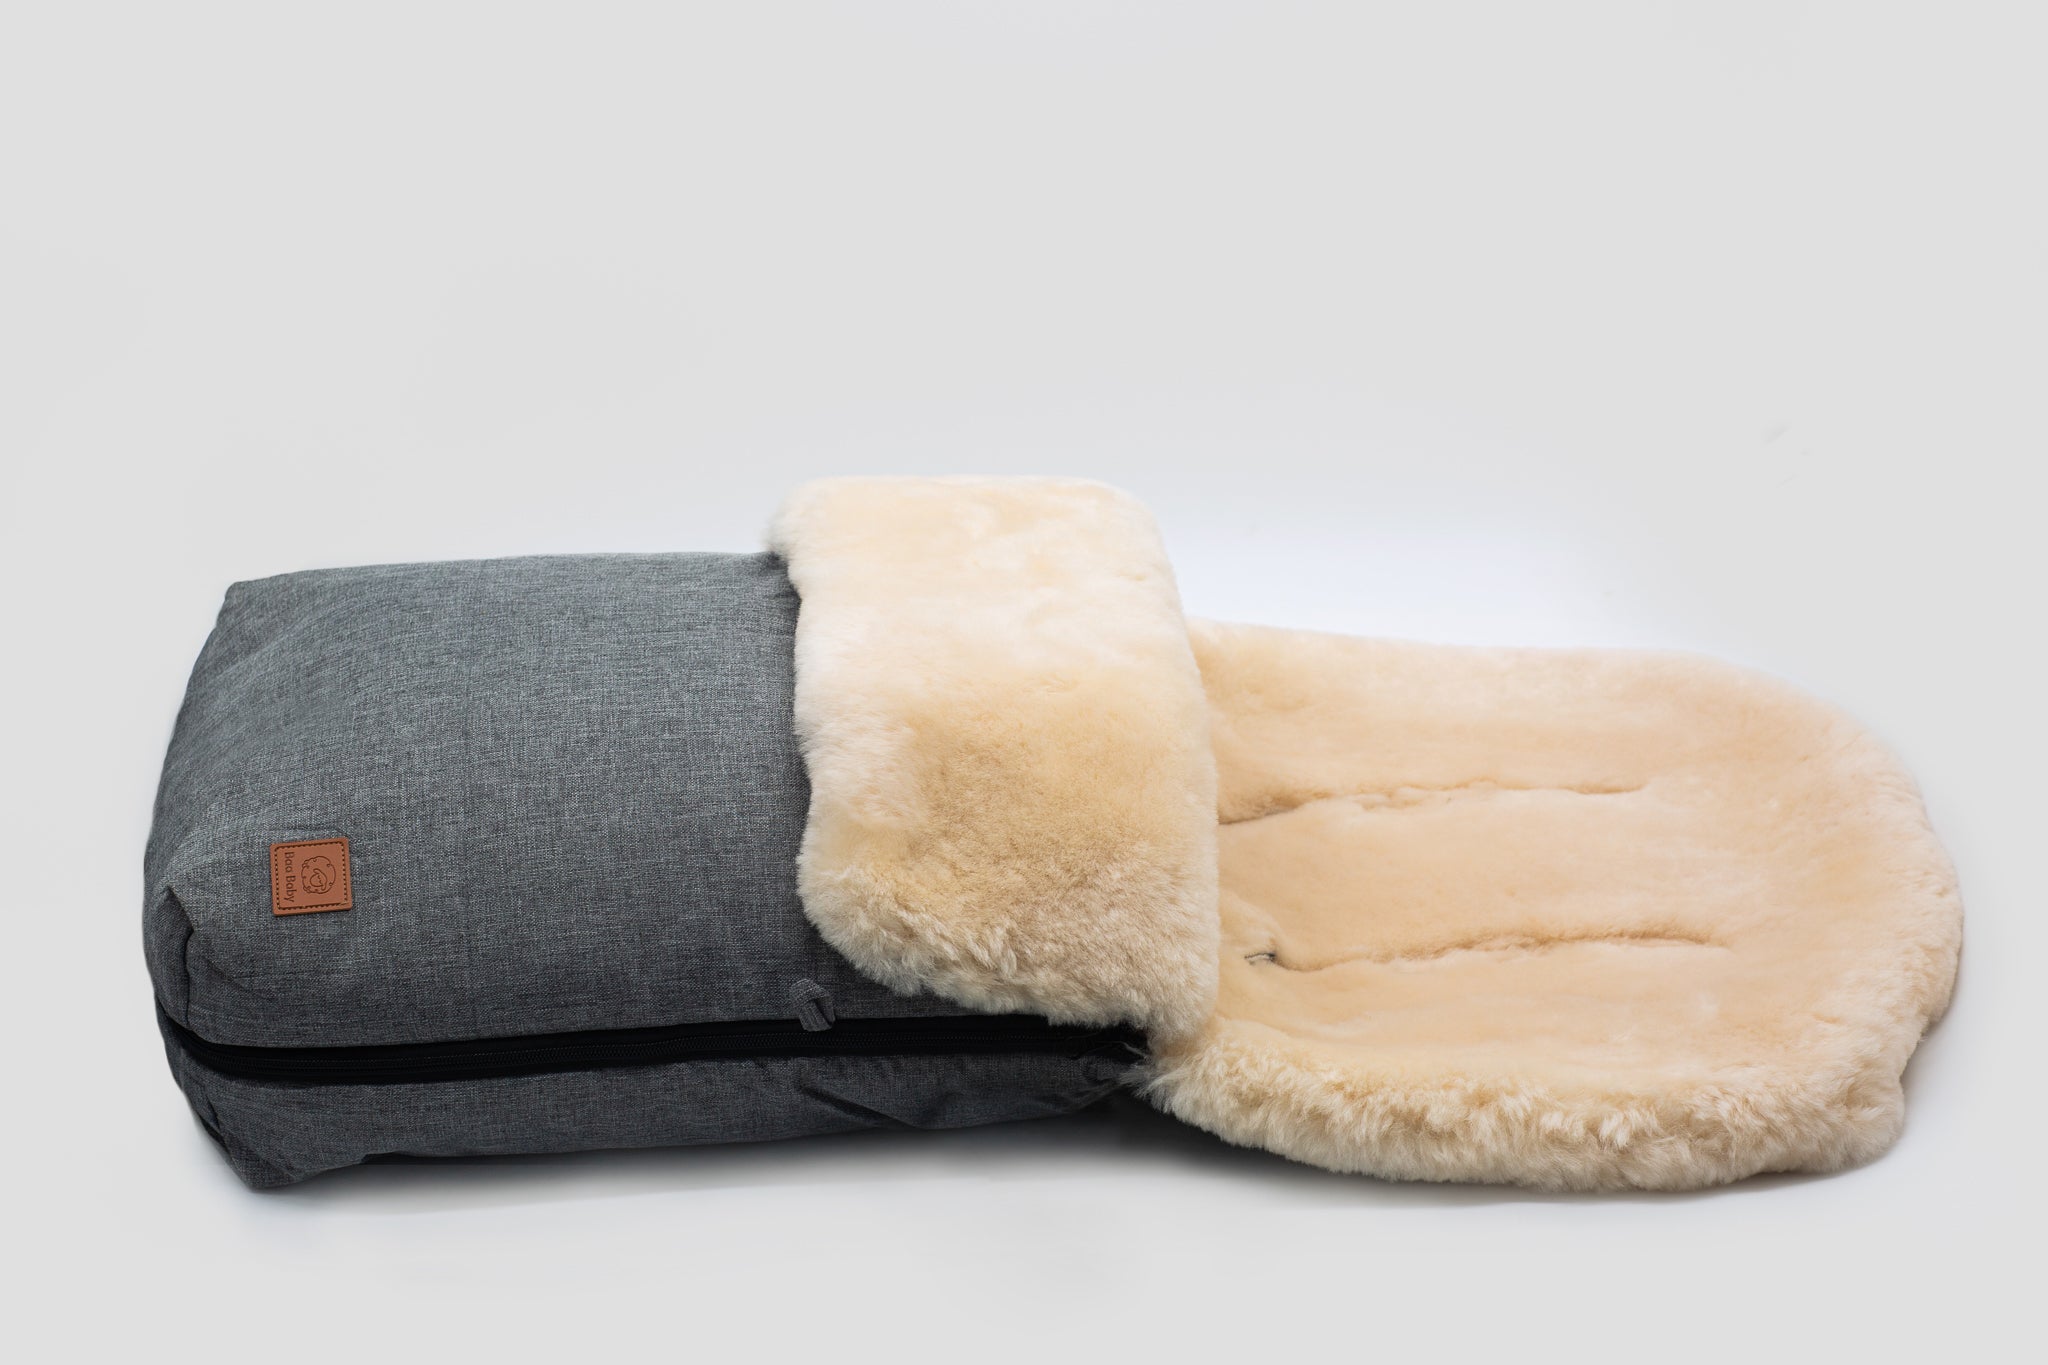 We’ve launched our very own Baa Baby Original Footmuff!